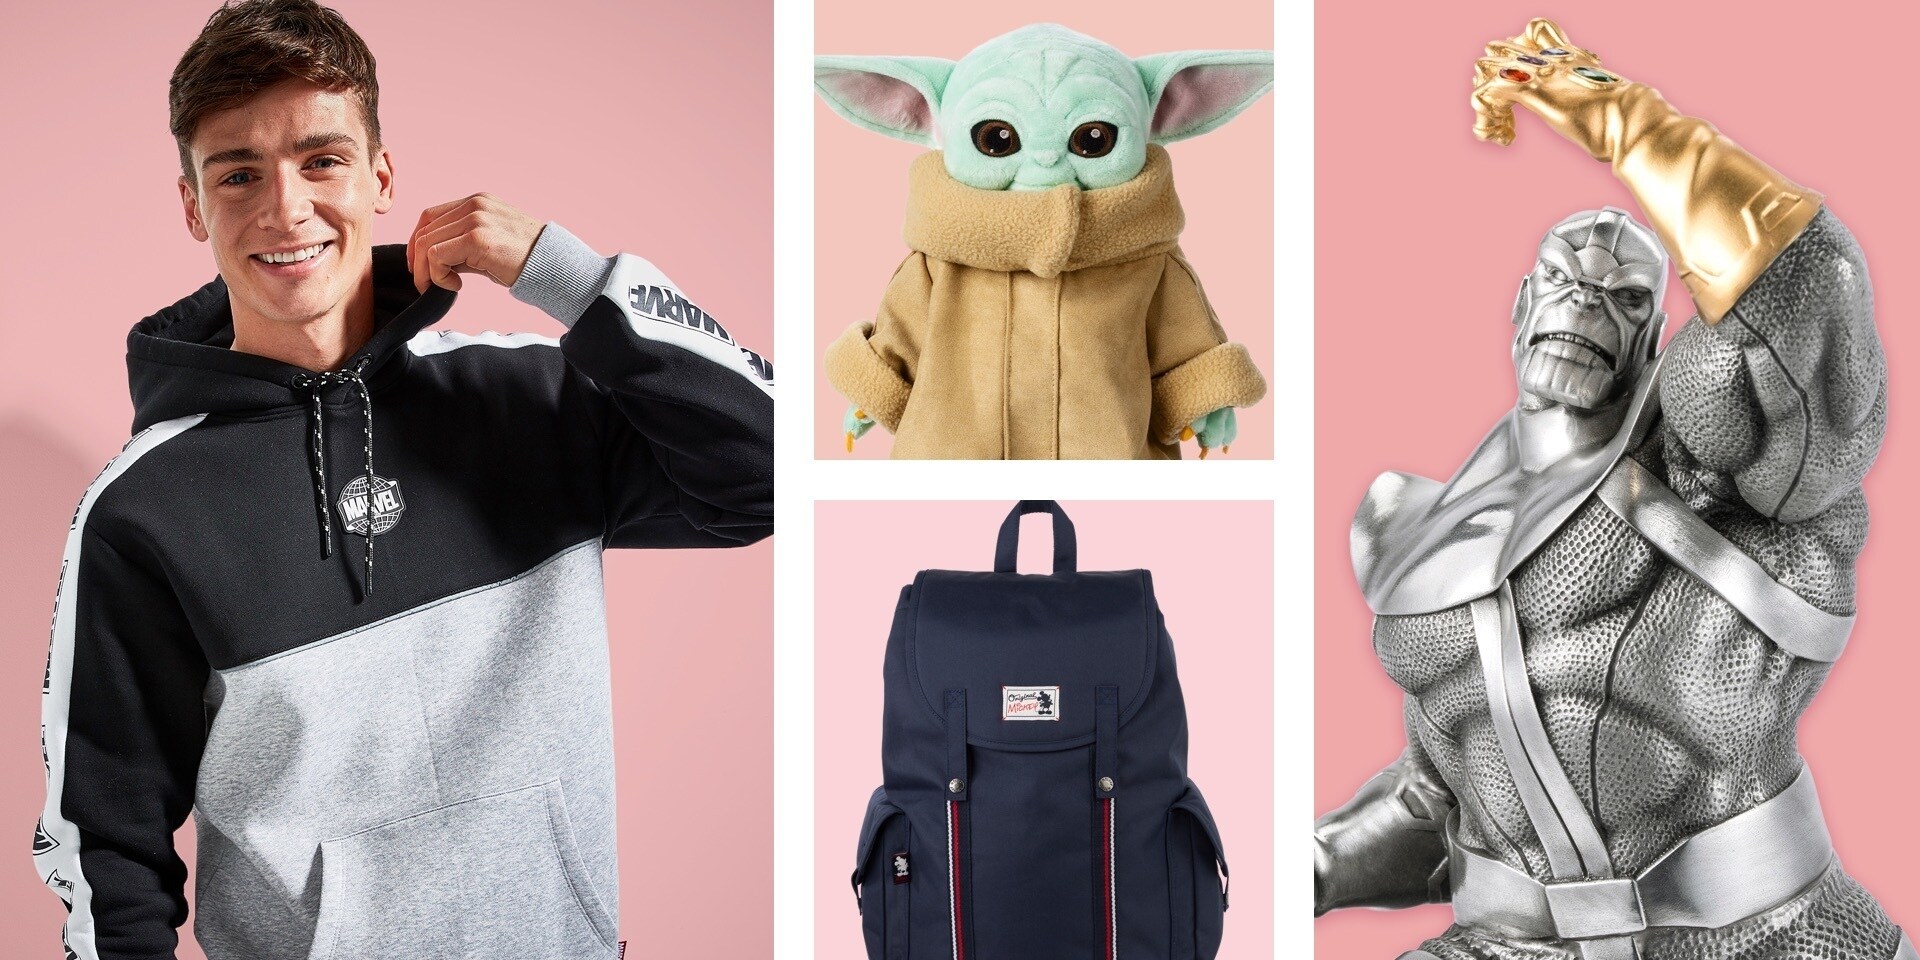 Male wearing a Marvel sweatshirt, Mickey Mouse backpack, The Child soft toy and Thor figurine